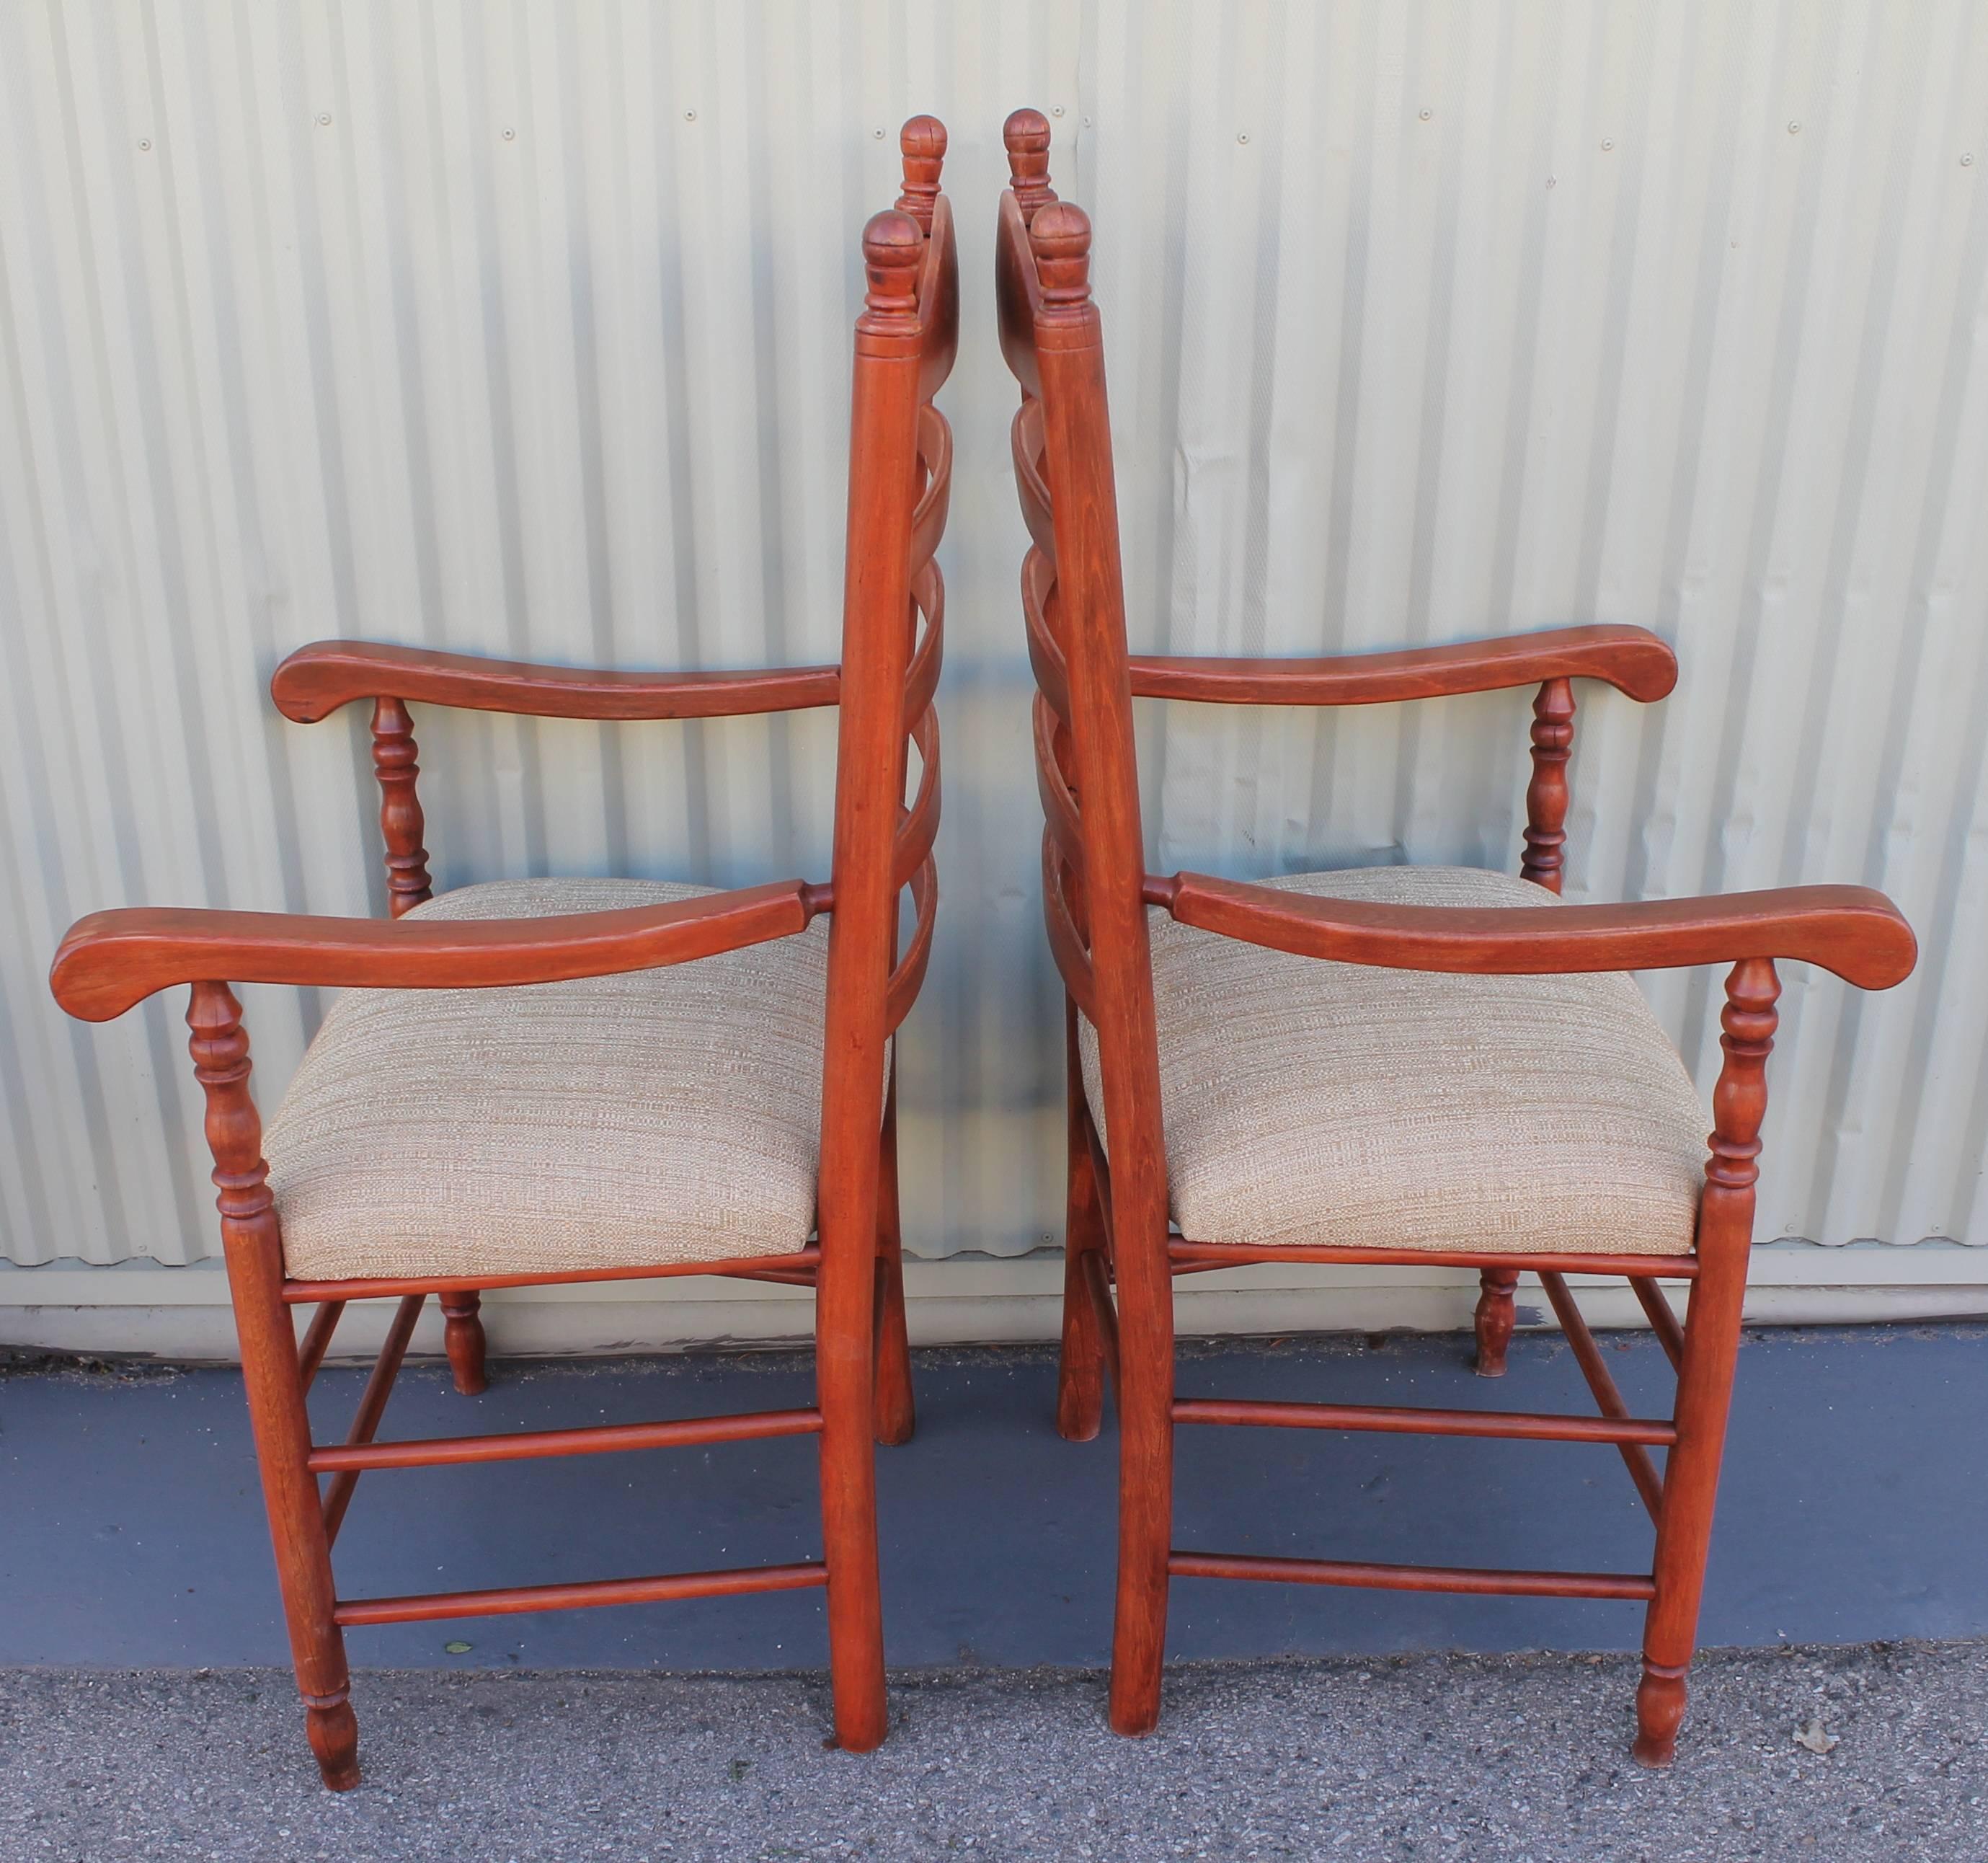 Pine Matching Pair of 19th Century N.E. Red Painted Ladder Back Arm Chairs